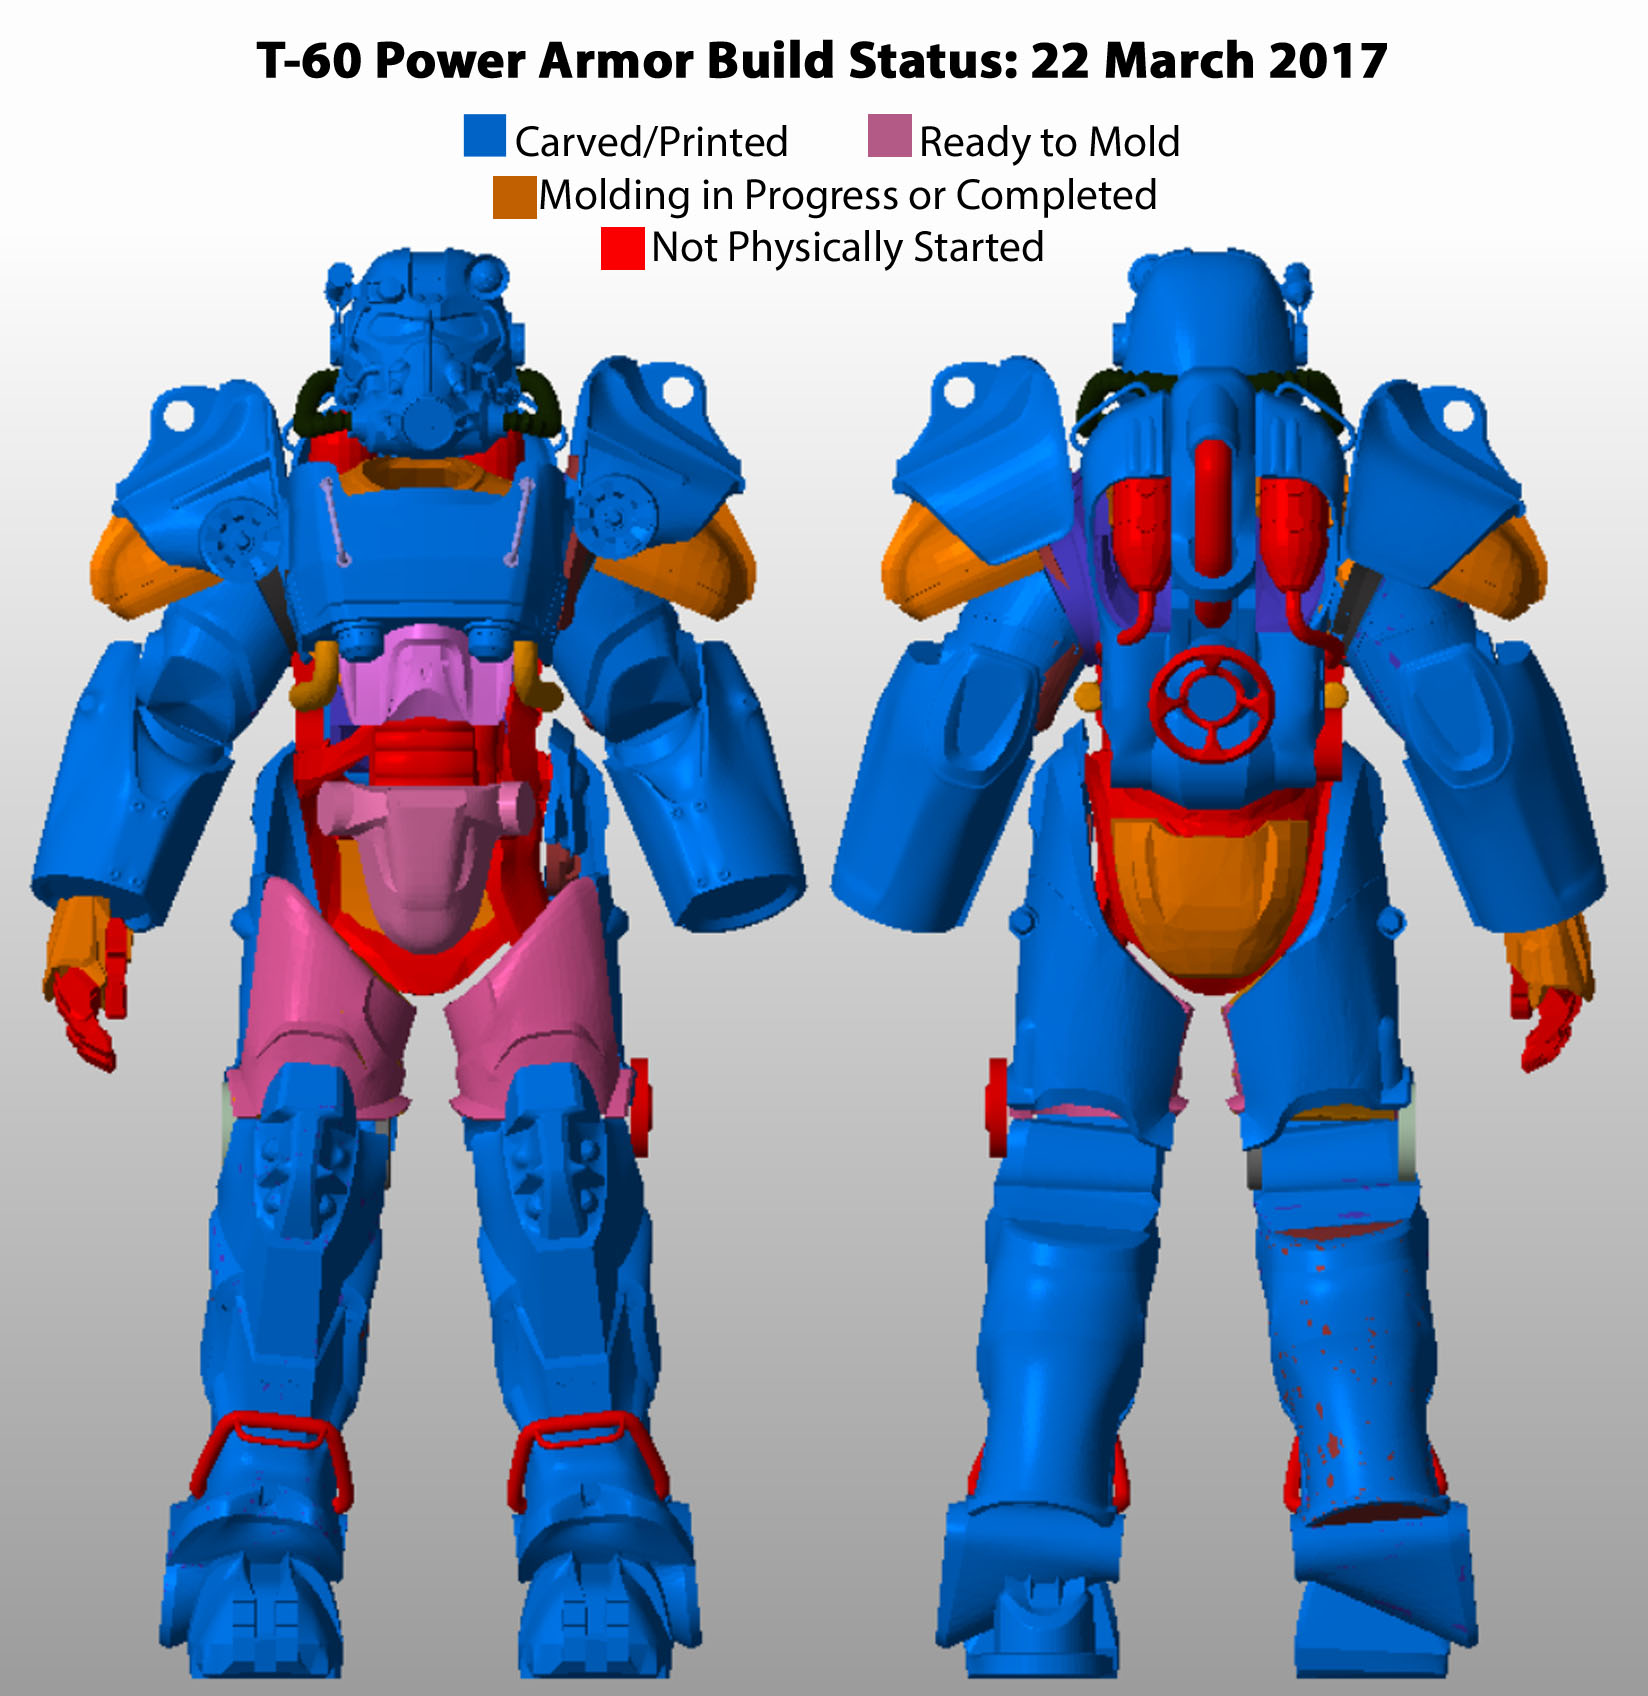 Thorssoli S T 60 Power Armor Build From Fallout 4 Rpf Costume And Prop Maker Community